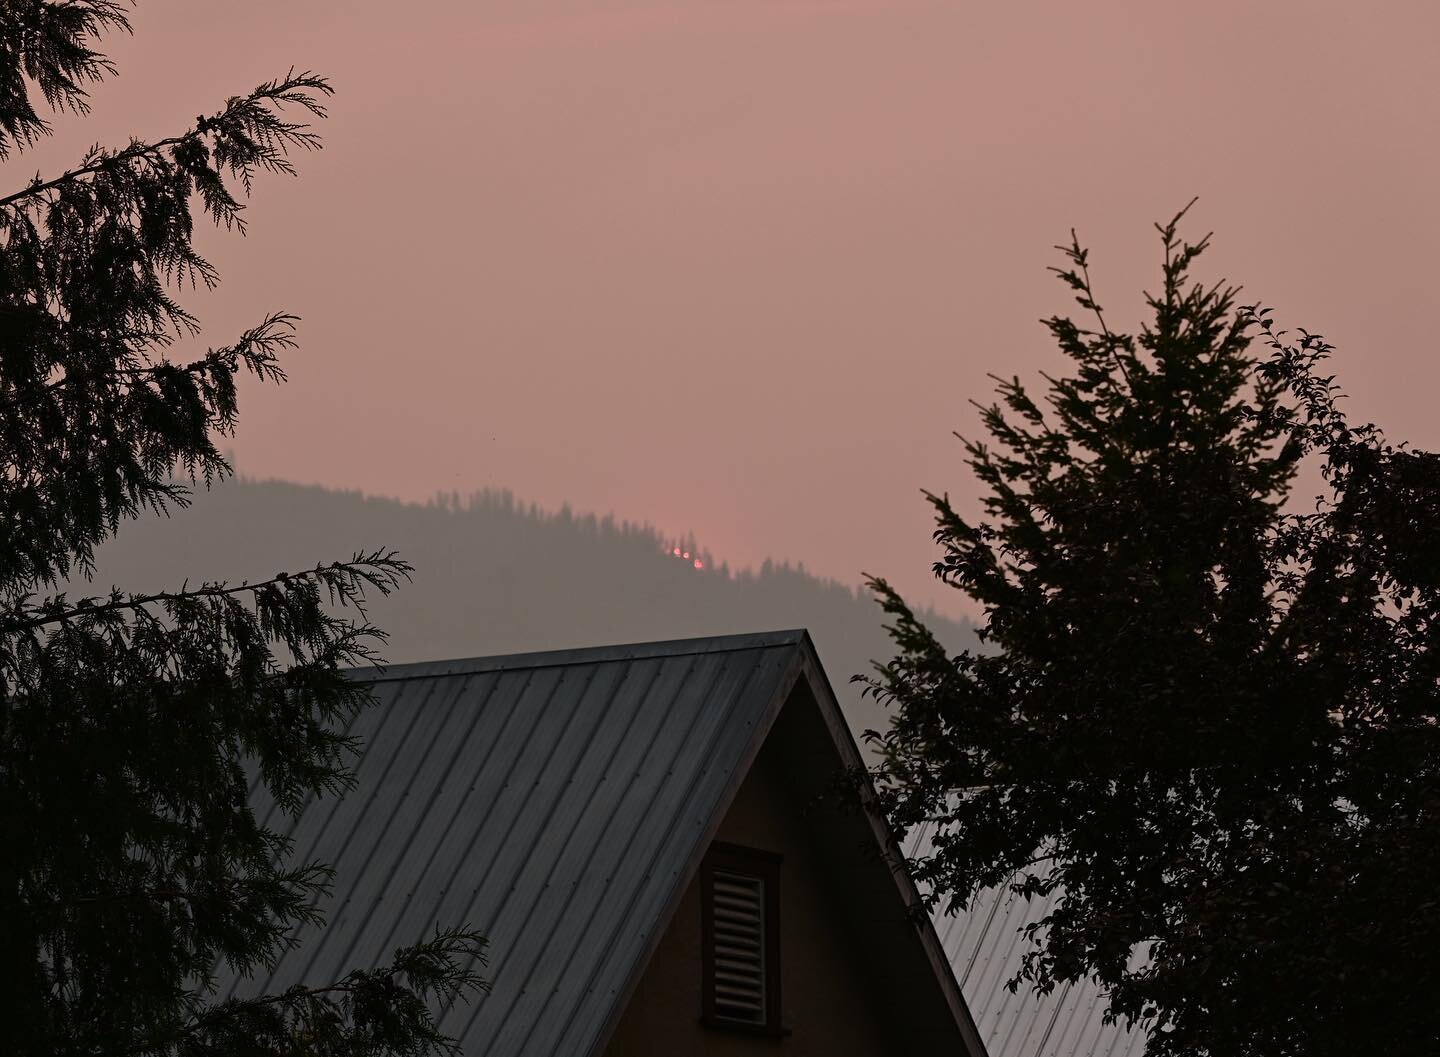 It has been a smokey month in Revelstoke🔥 

#instagood #photooftheday #photography #beautifuldestinations #picoftheday #nature #travel #instadaily #justgoshoot #instagood #instaphoto #photogram #capture #photographydaily #photographyislife #photogra